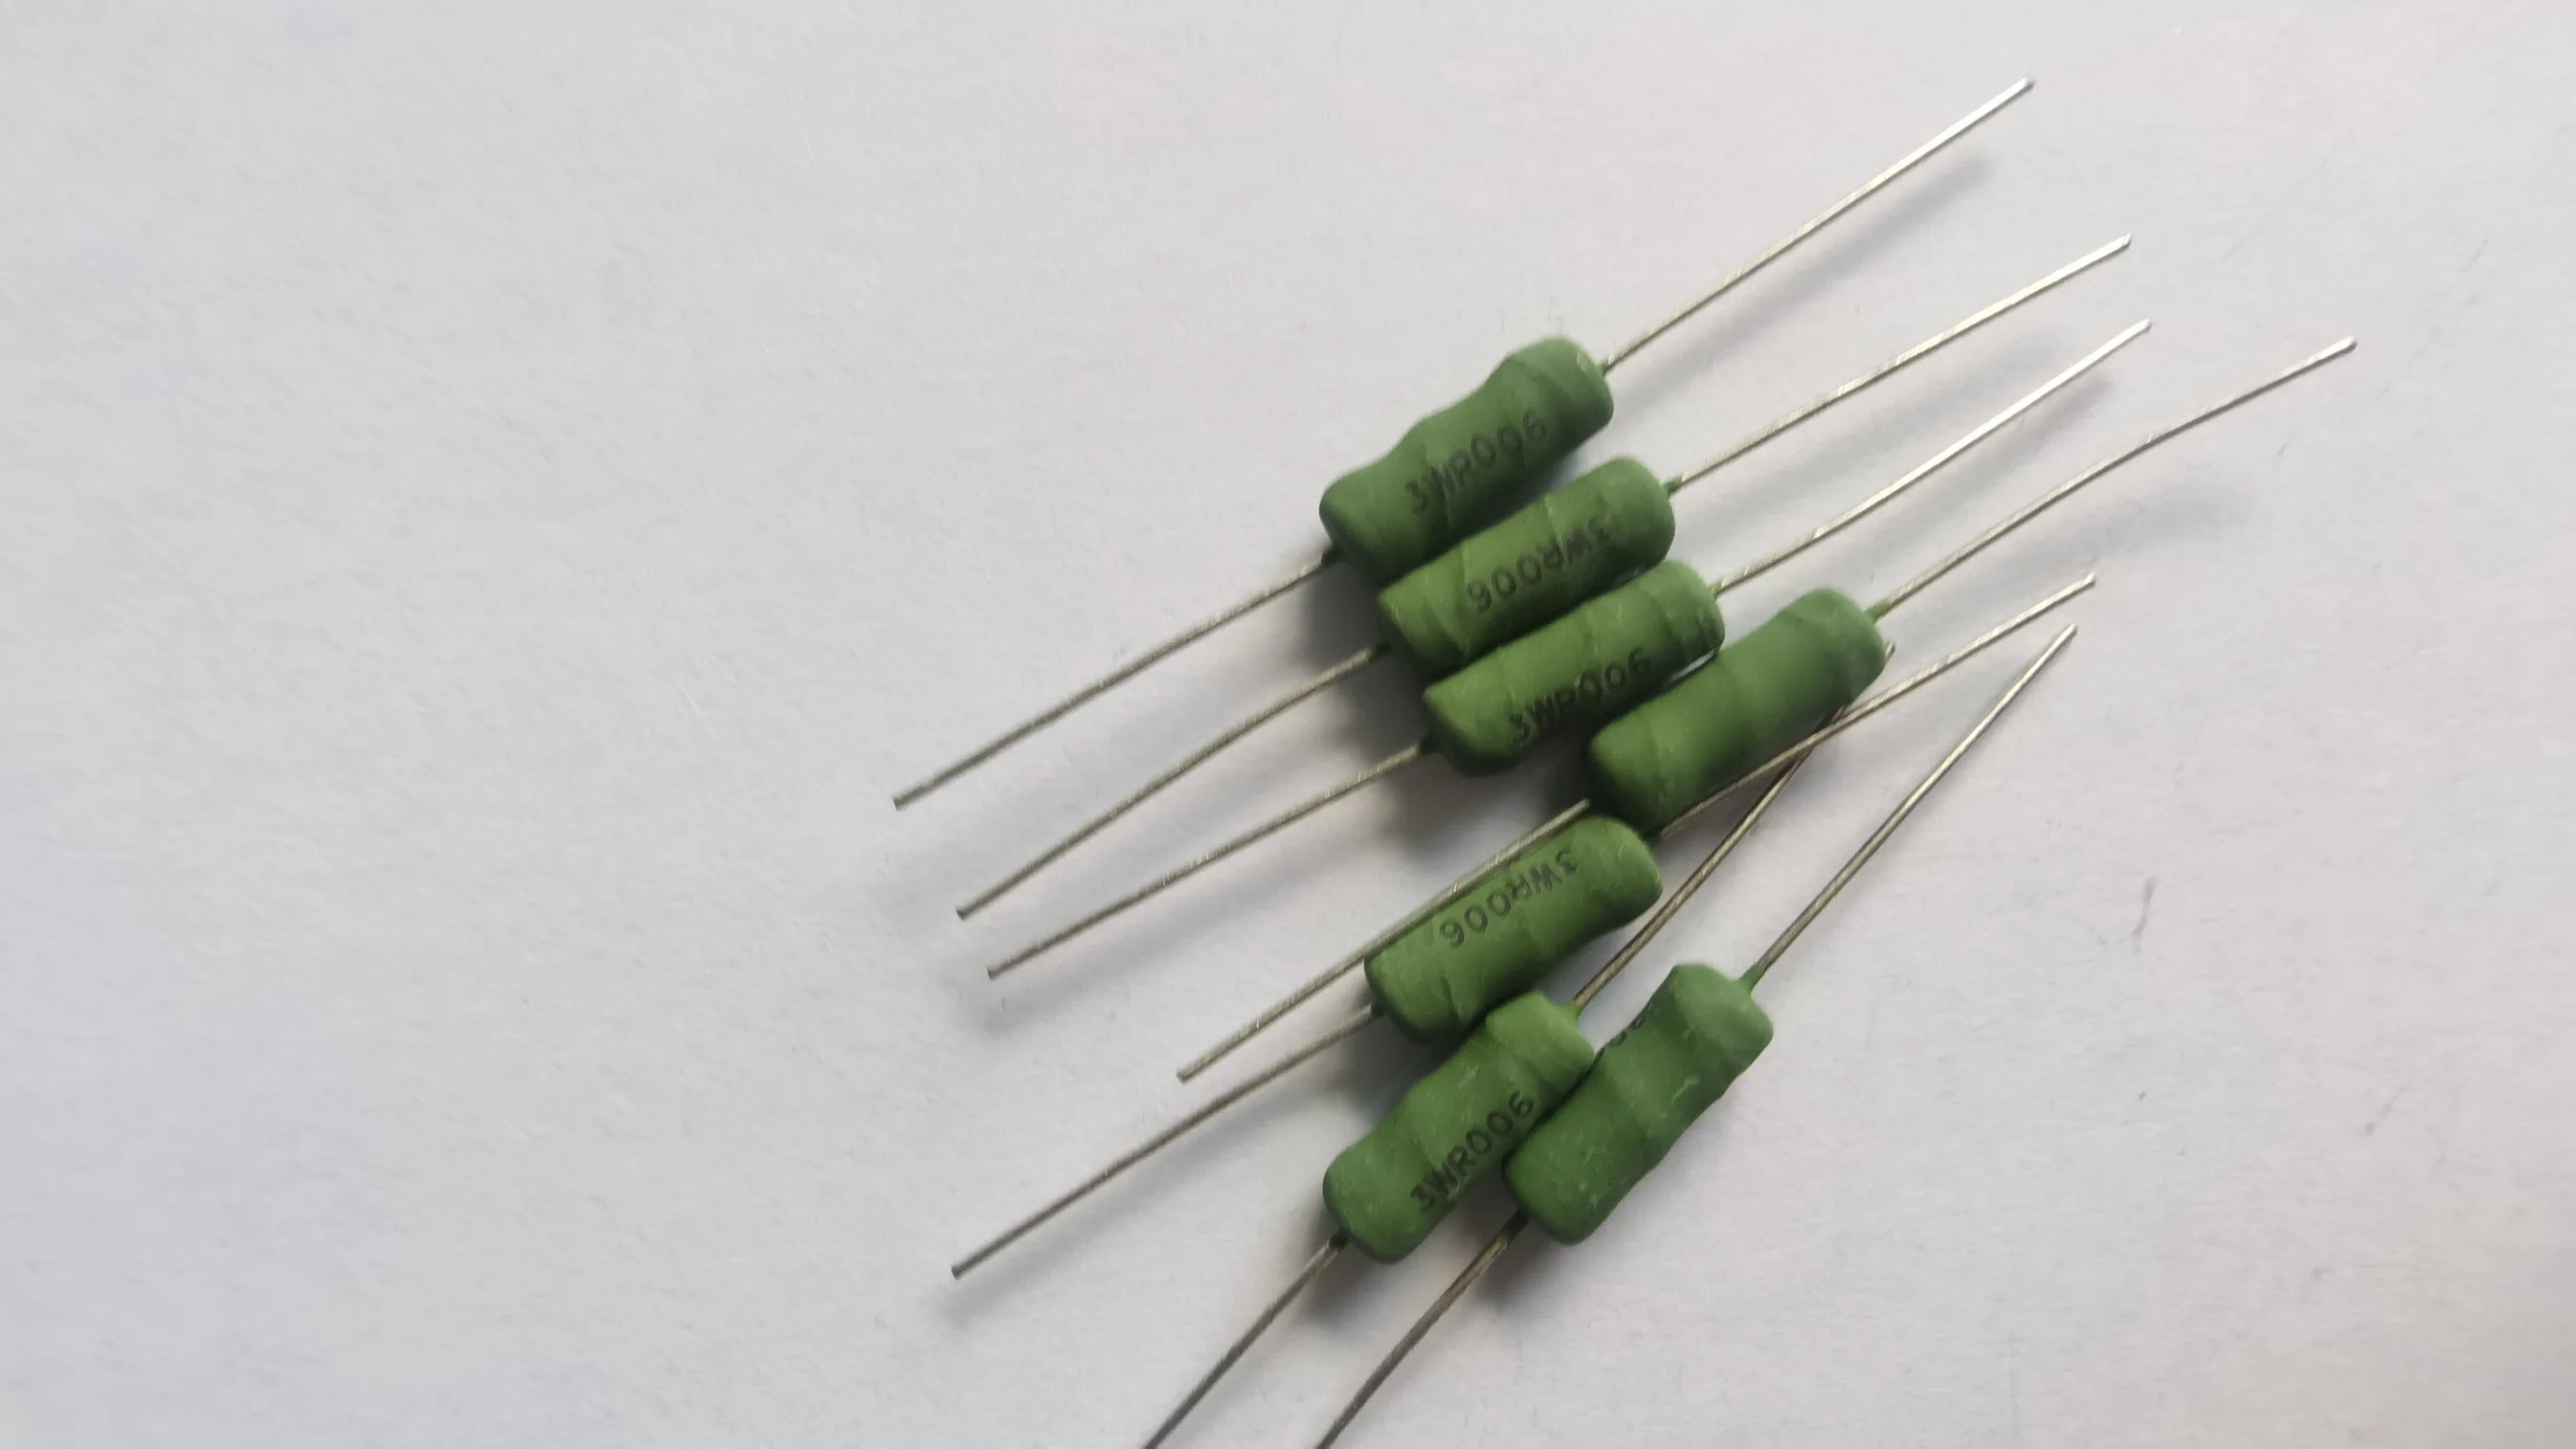 Axial Leaded Wirewound Resistors, Withstand High Voltage